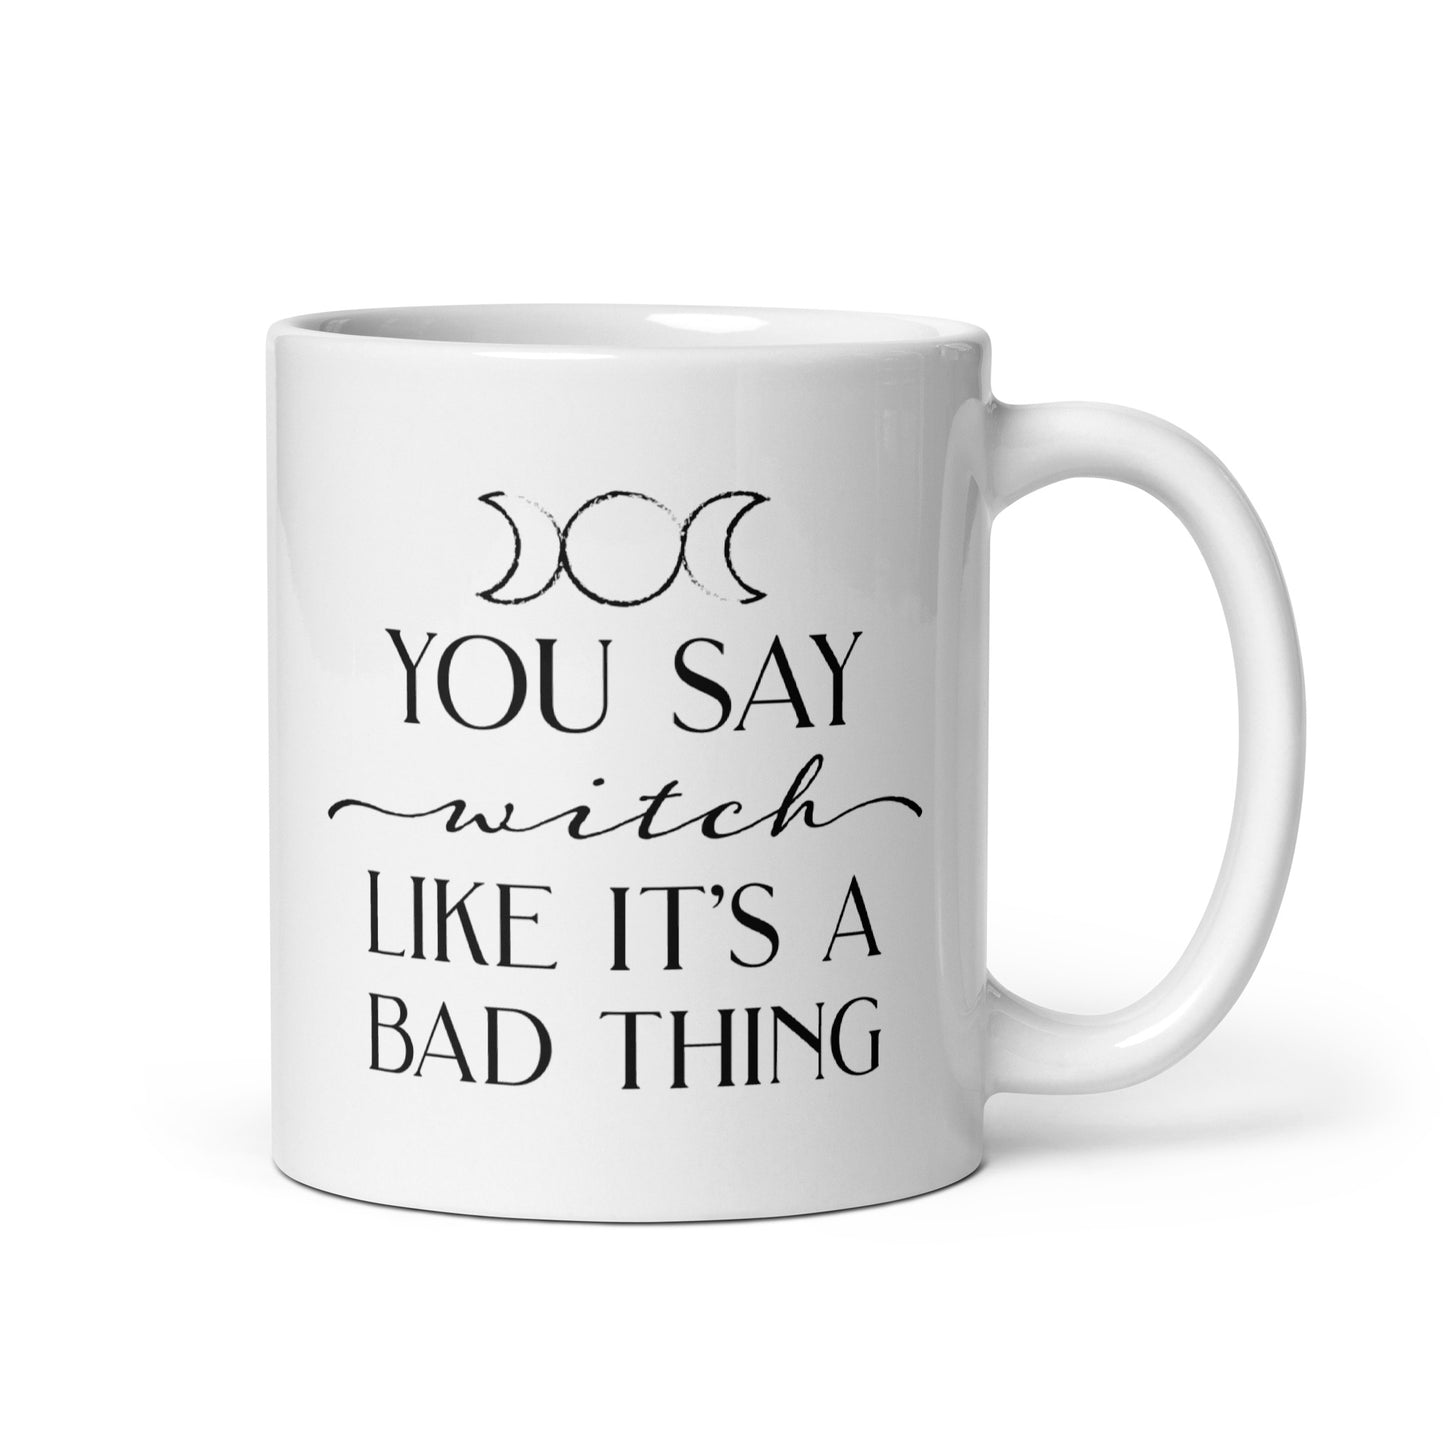 You Say "Witch" Like It's A Bad Thing Mug